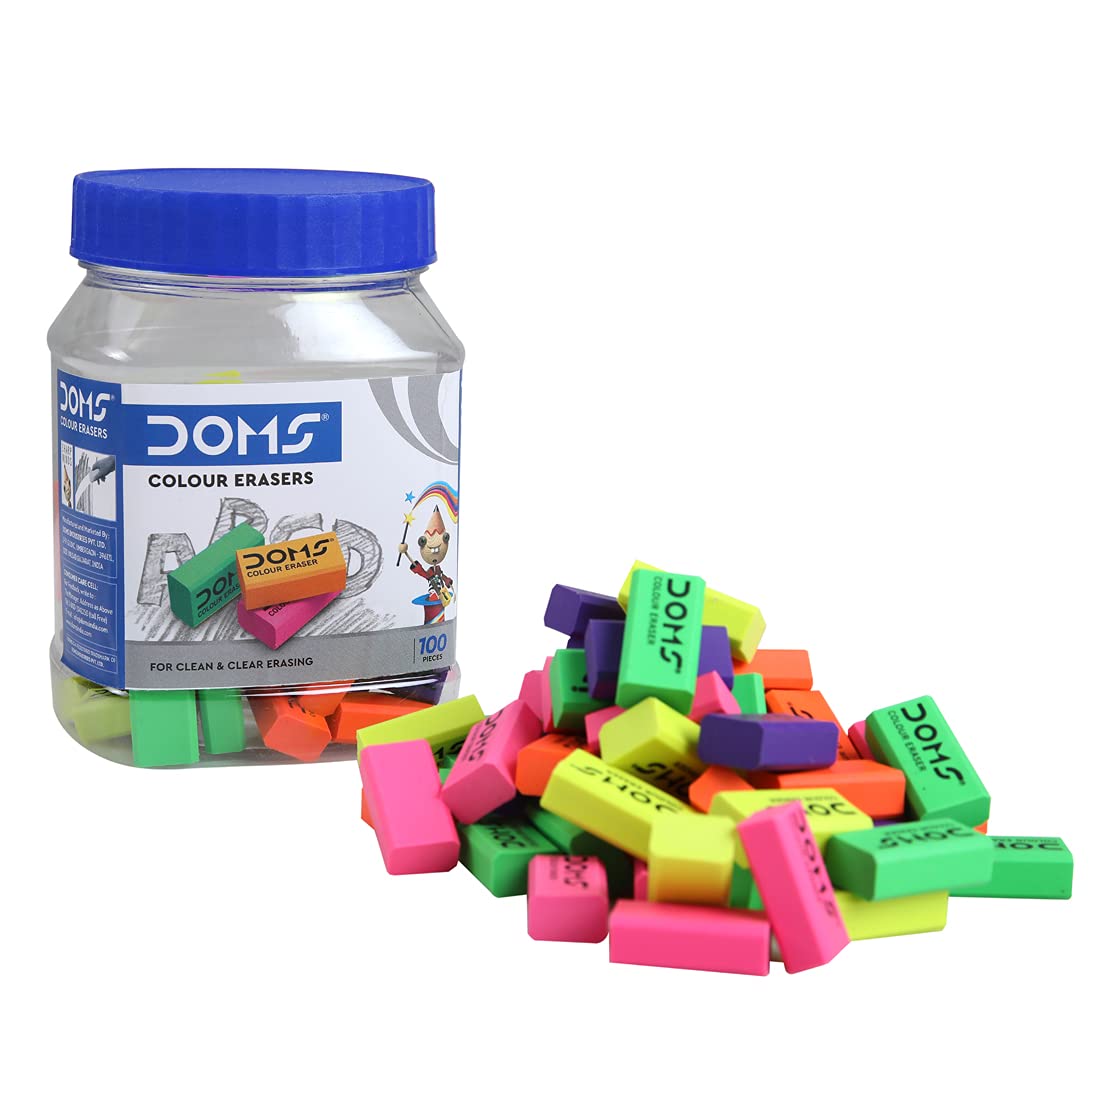 DOMS Non-Toxic Dust Free Coloured Erasers Jar Pack Set (Pack of 100)